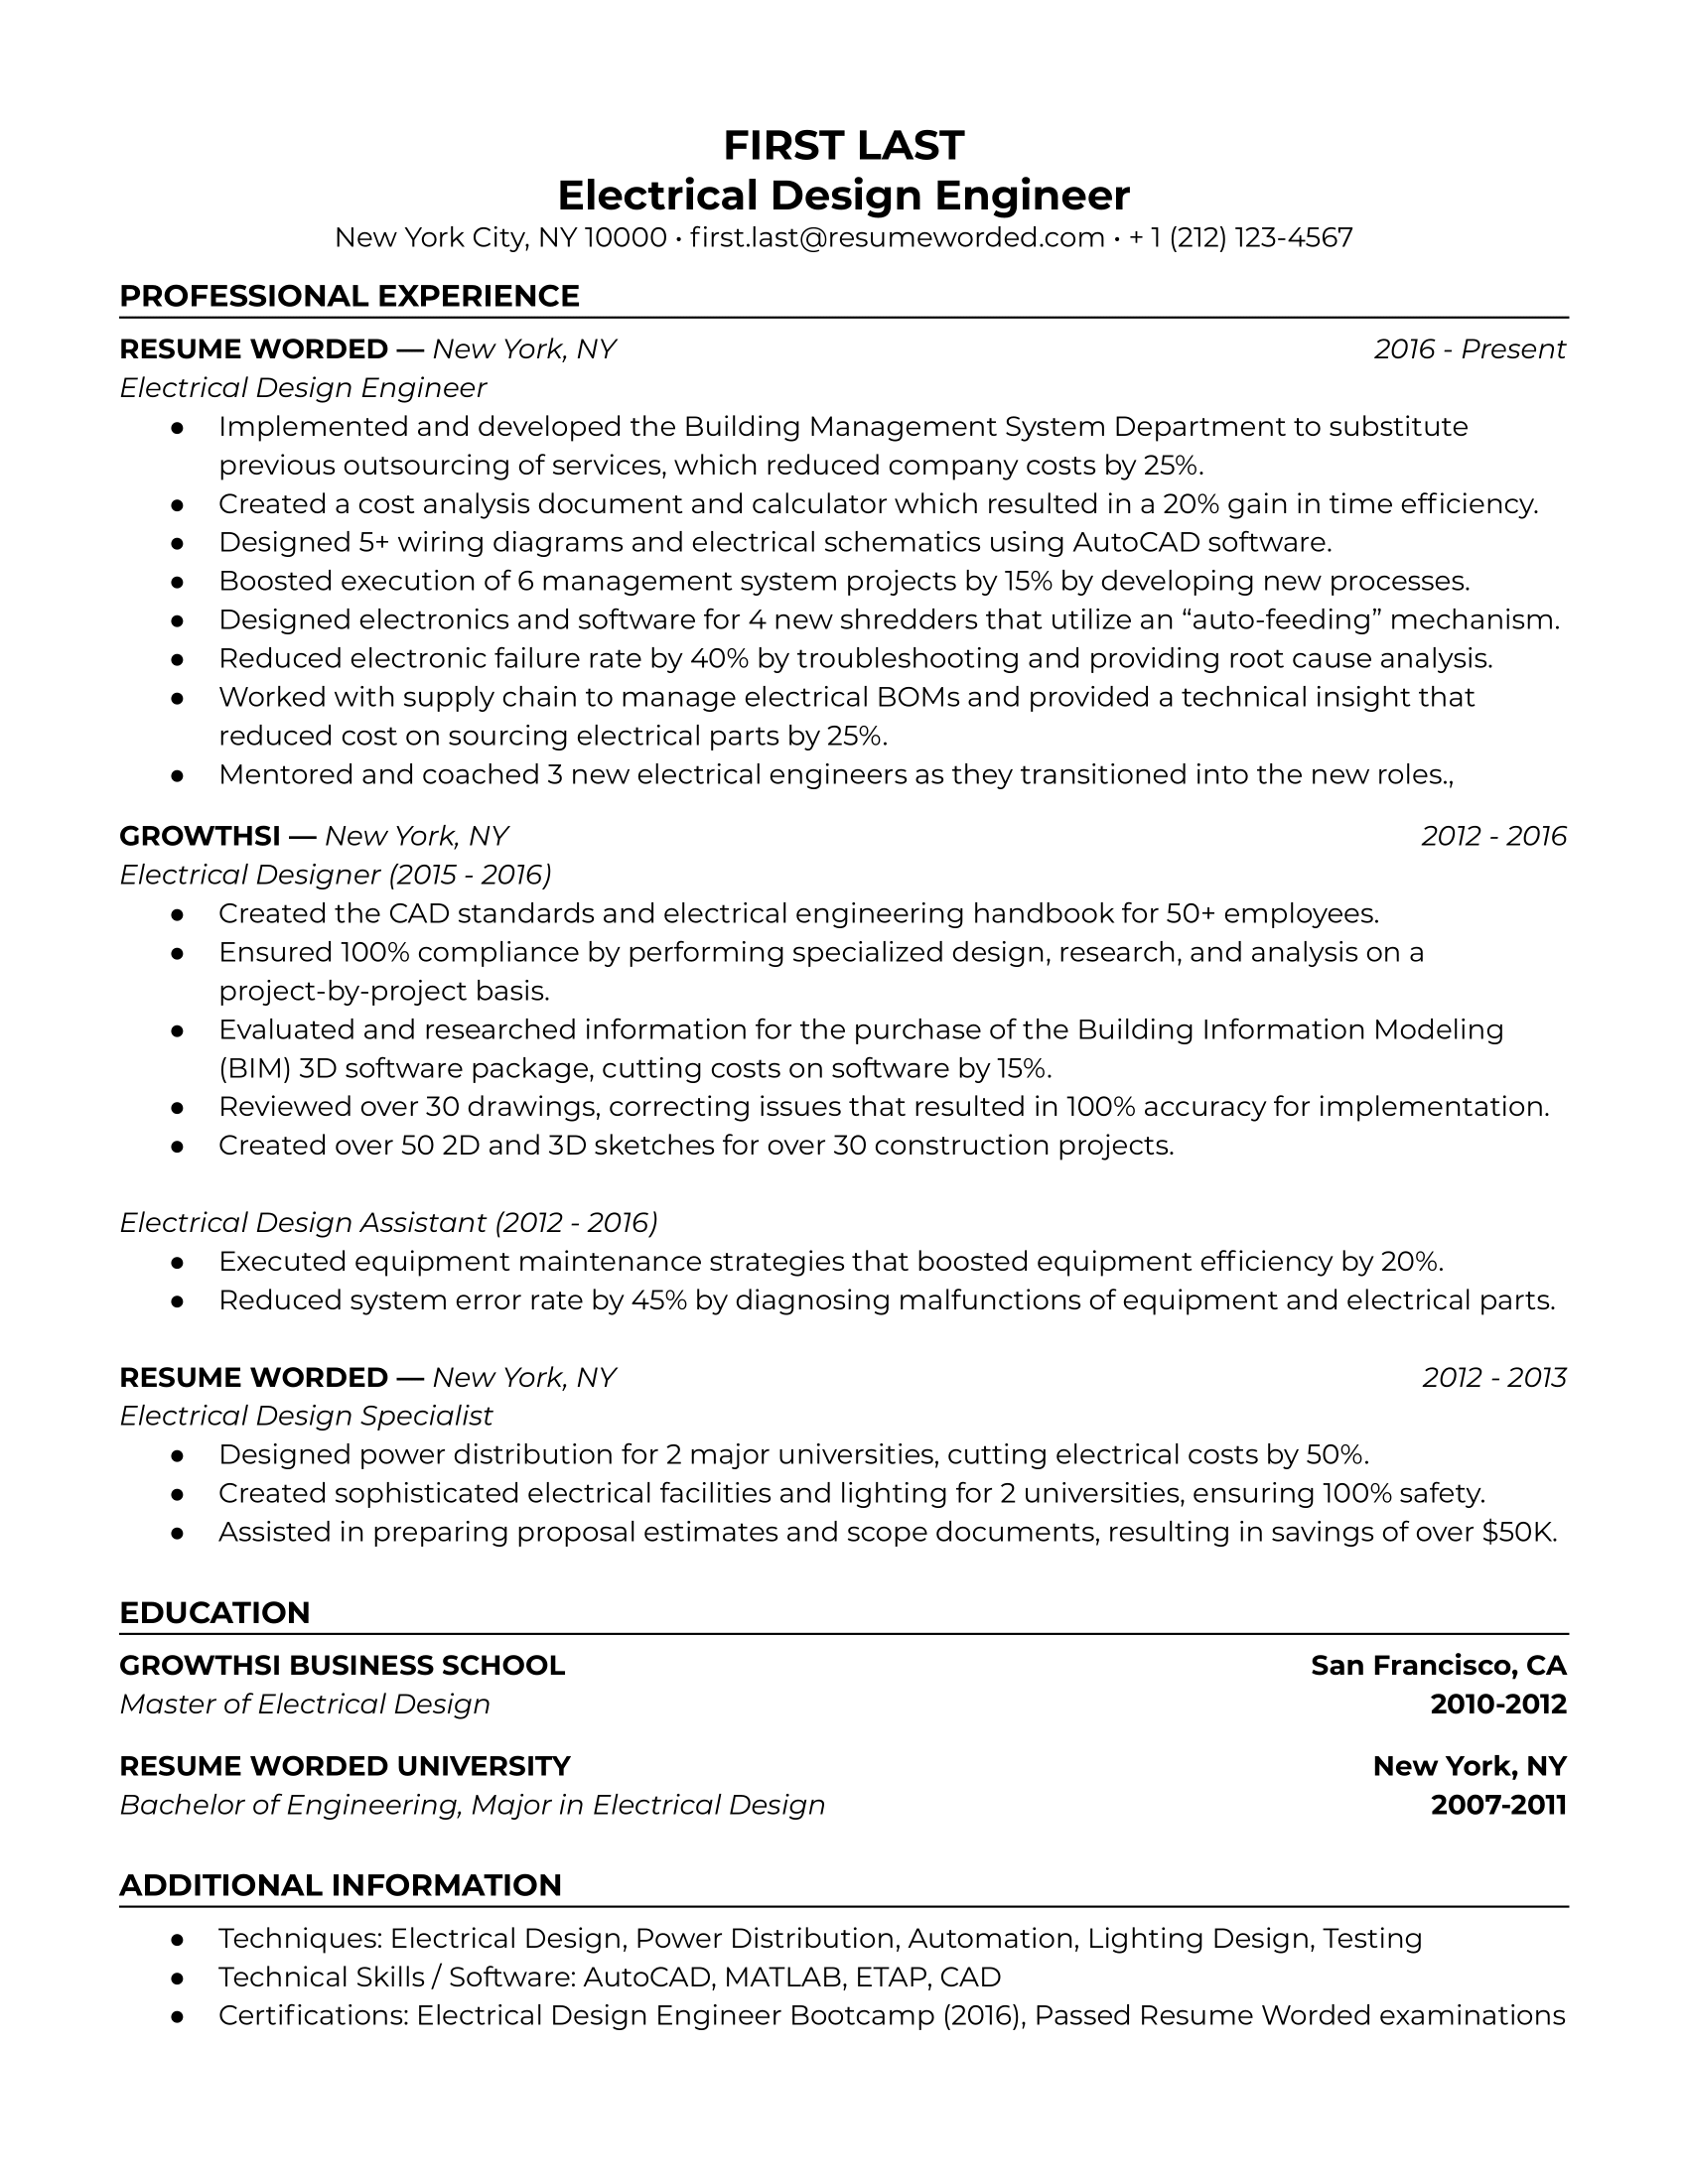 A neatly formatted CV for an Electrical Design Engineer highlighting software proficiency and sustainable energy projects.